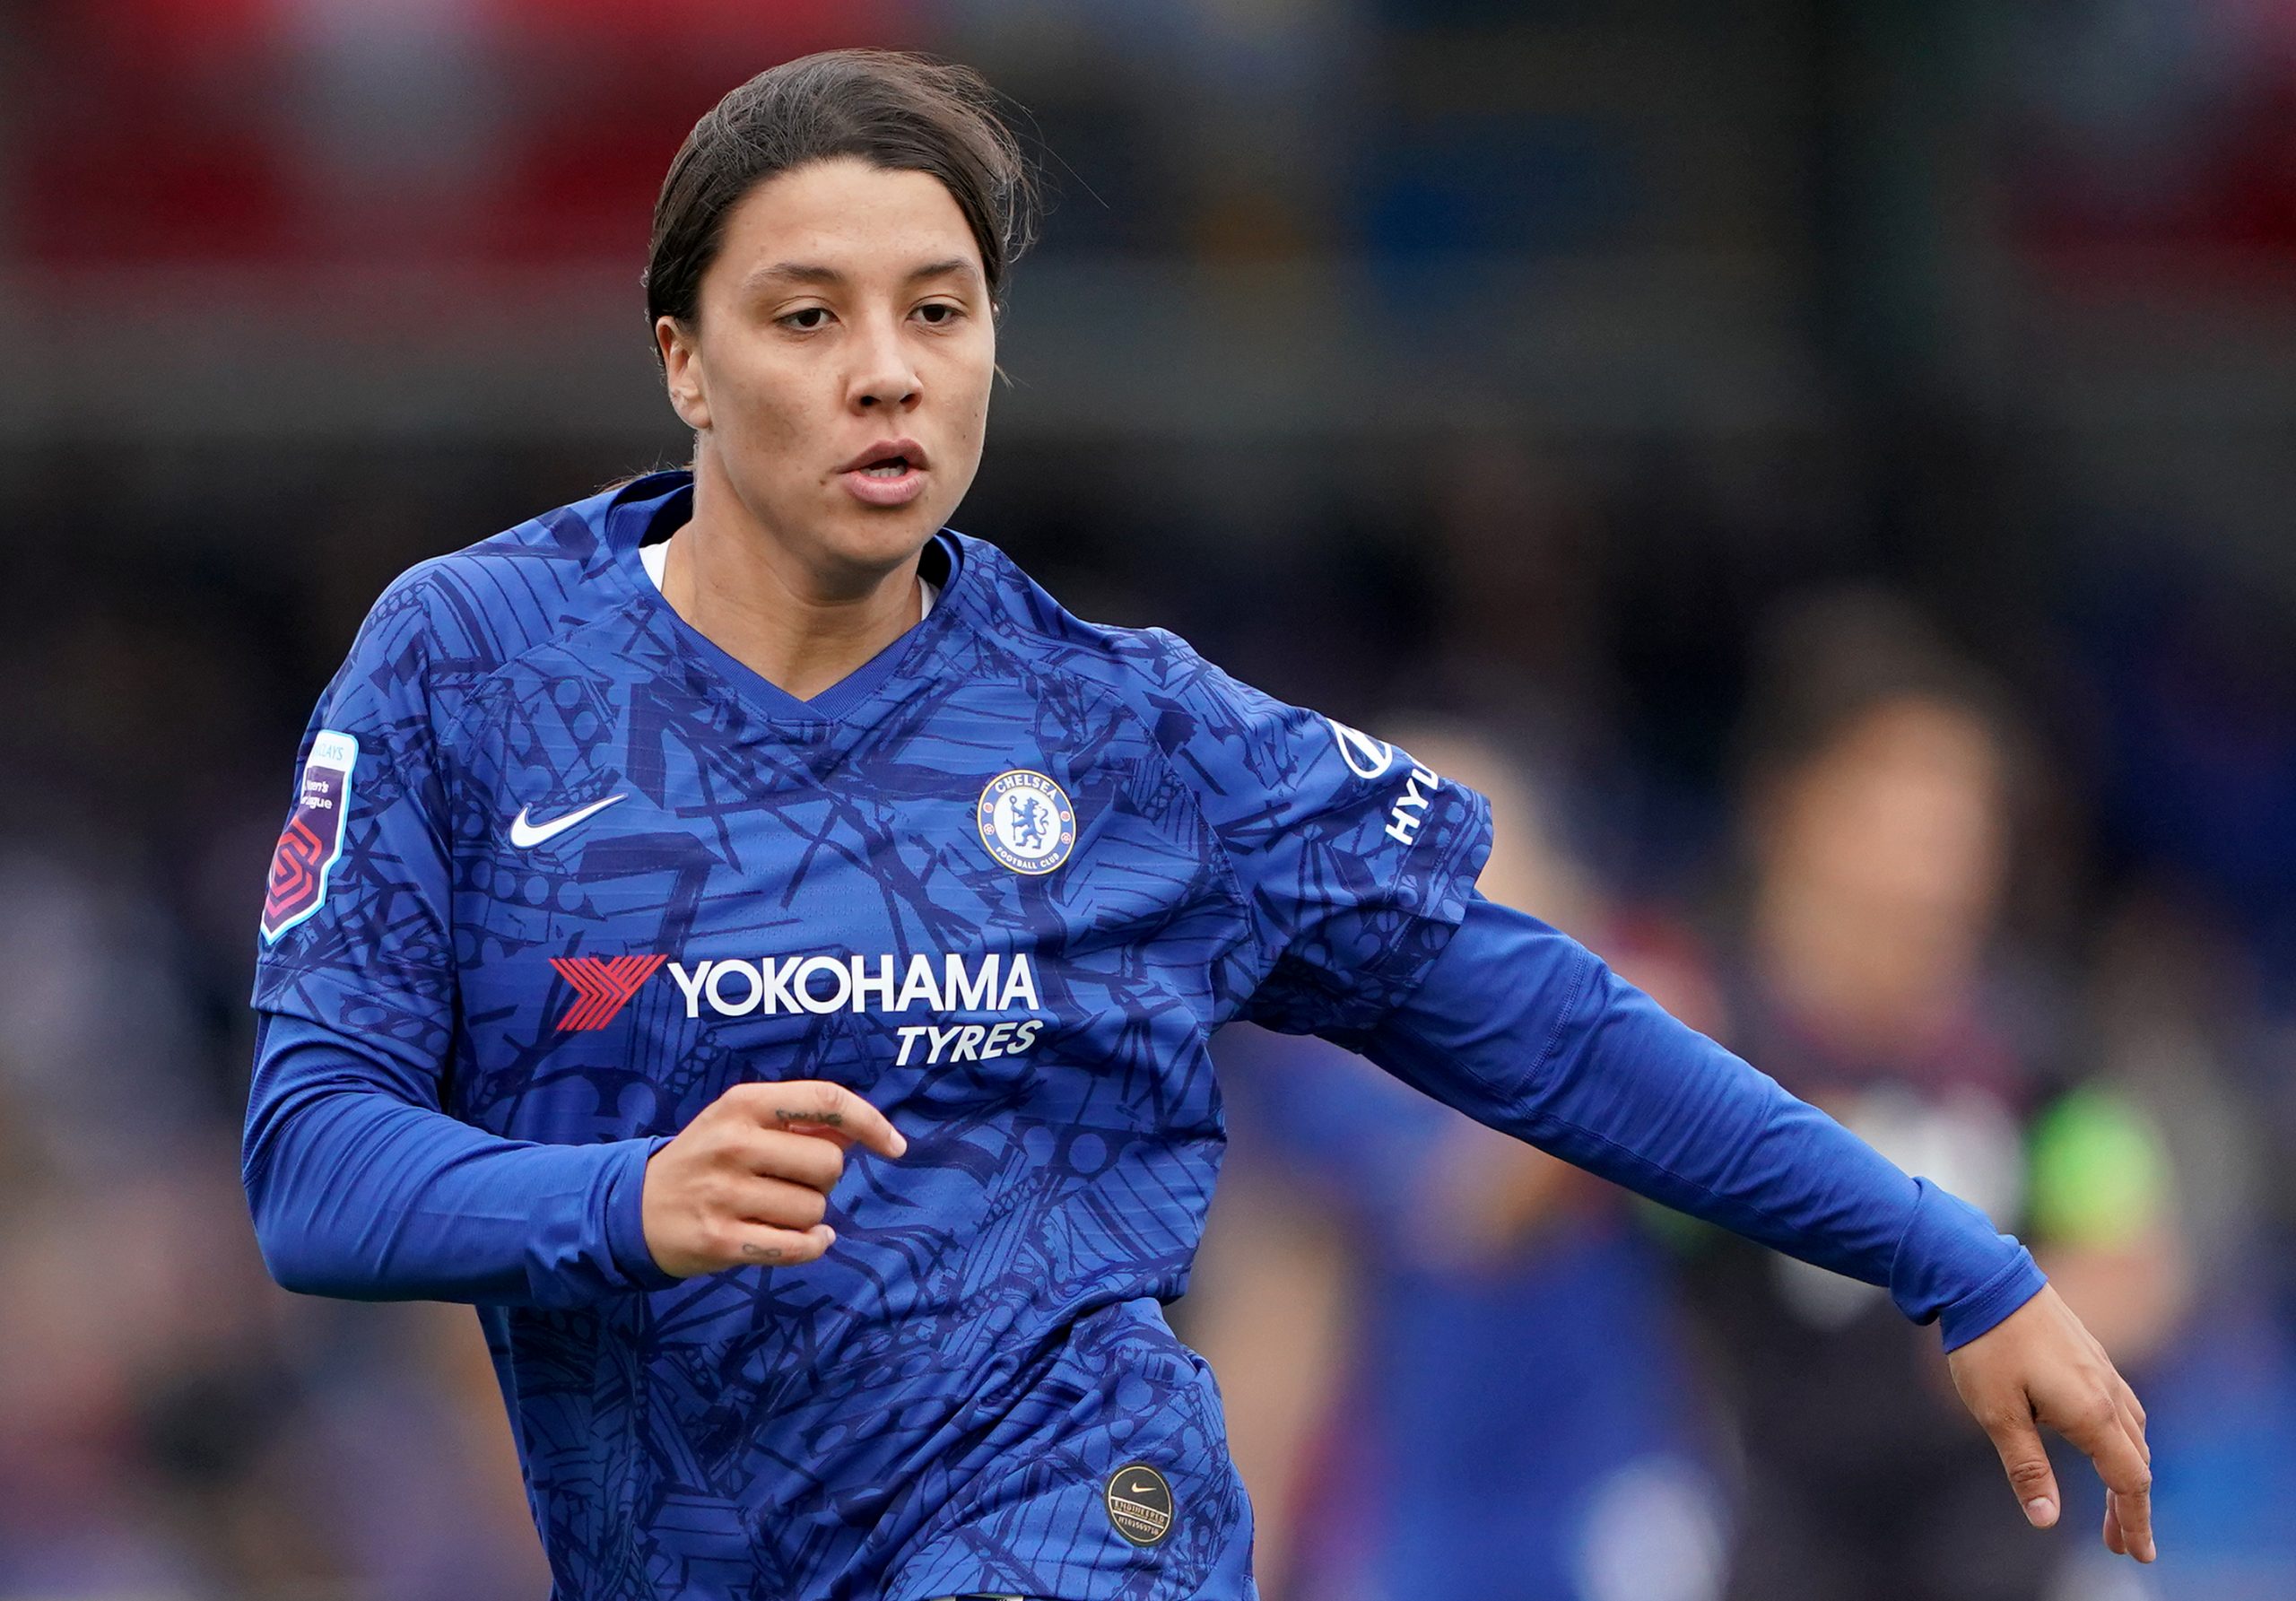 Sam Kerr isn't a luxury item for Chelsea, she's the missing piece they desperately need